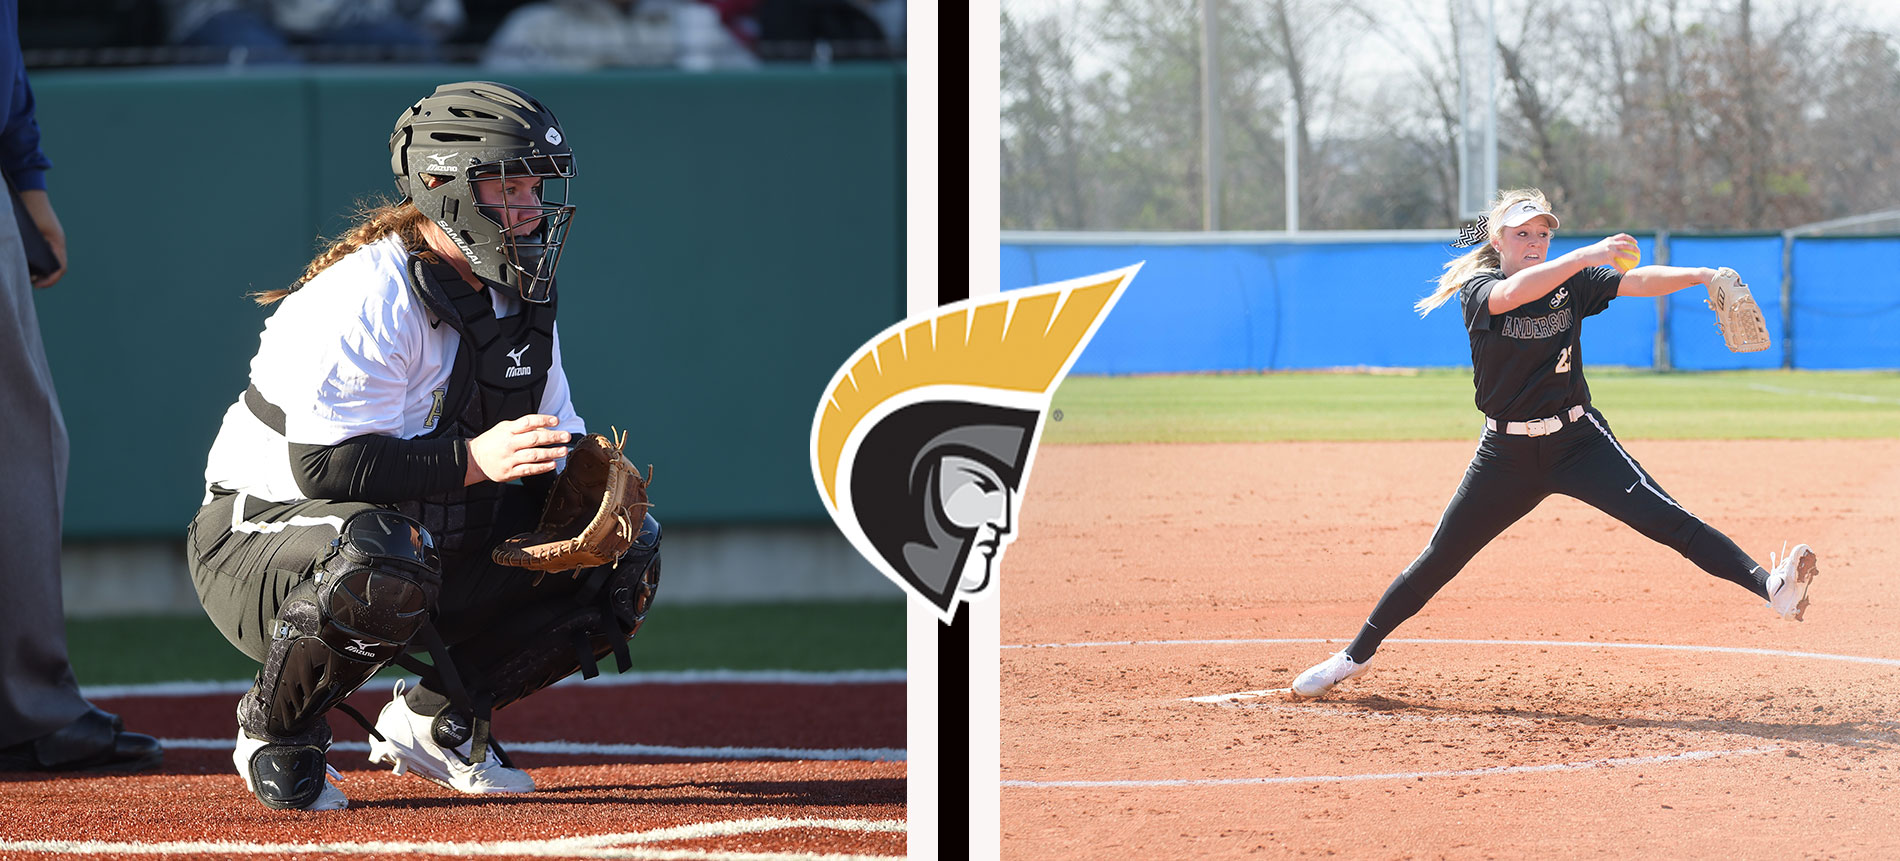 Niles and Duncan Named to the South Atlantic Conference Softball All-Tournament Team